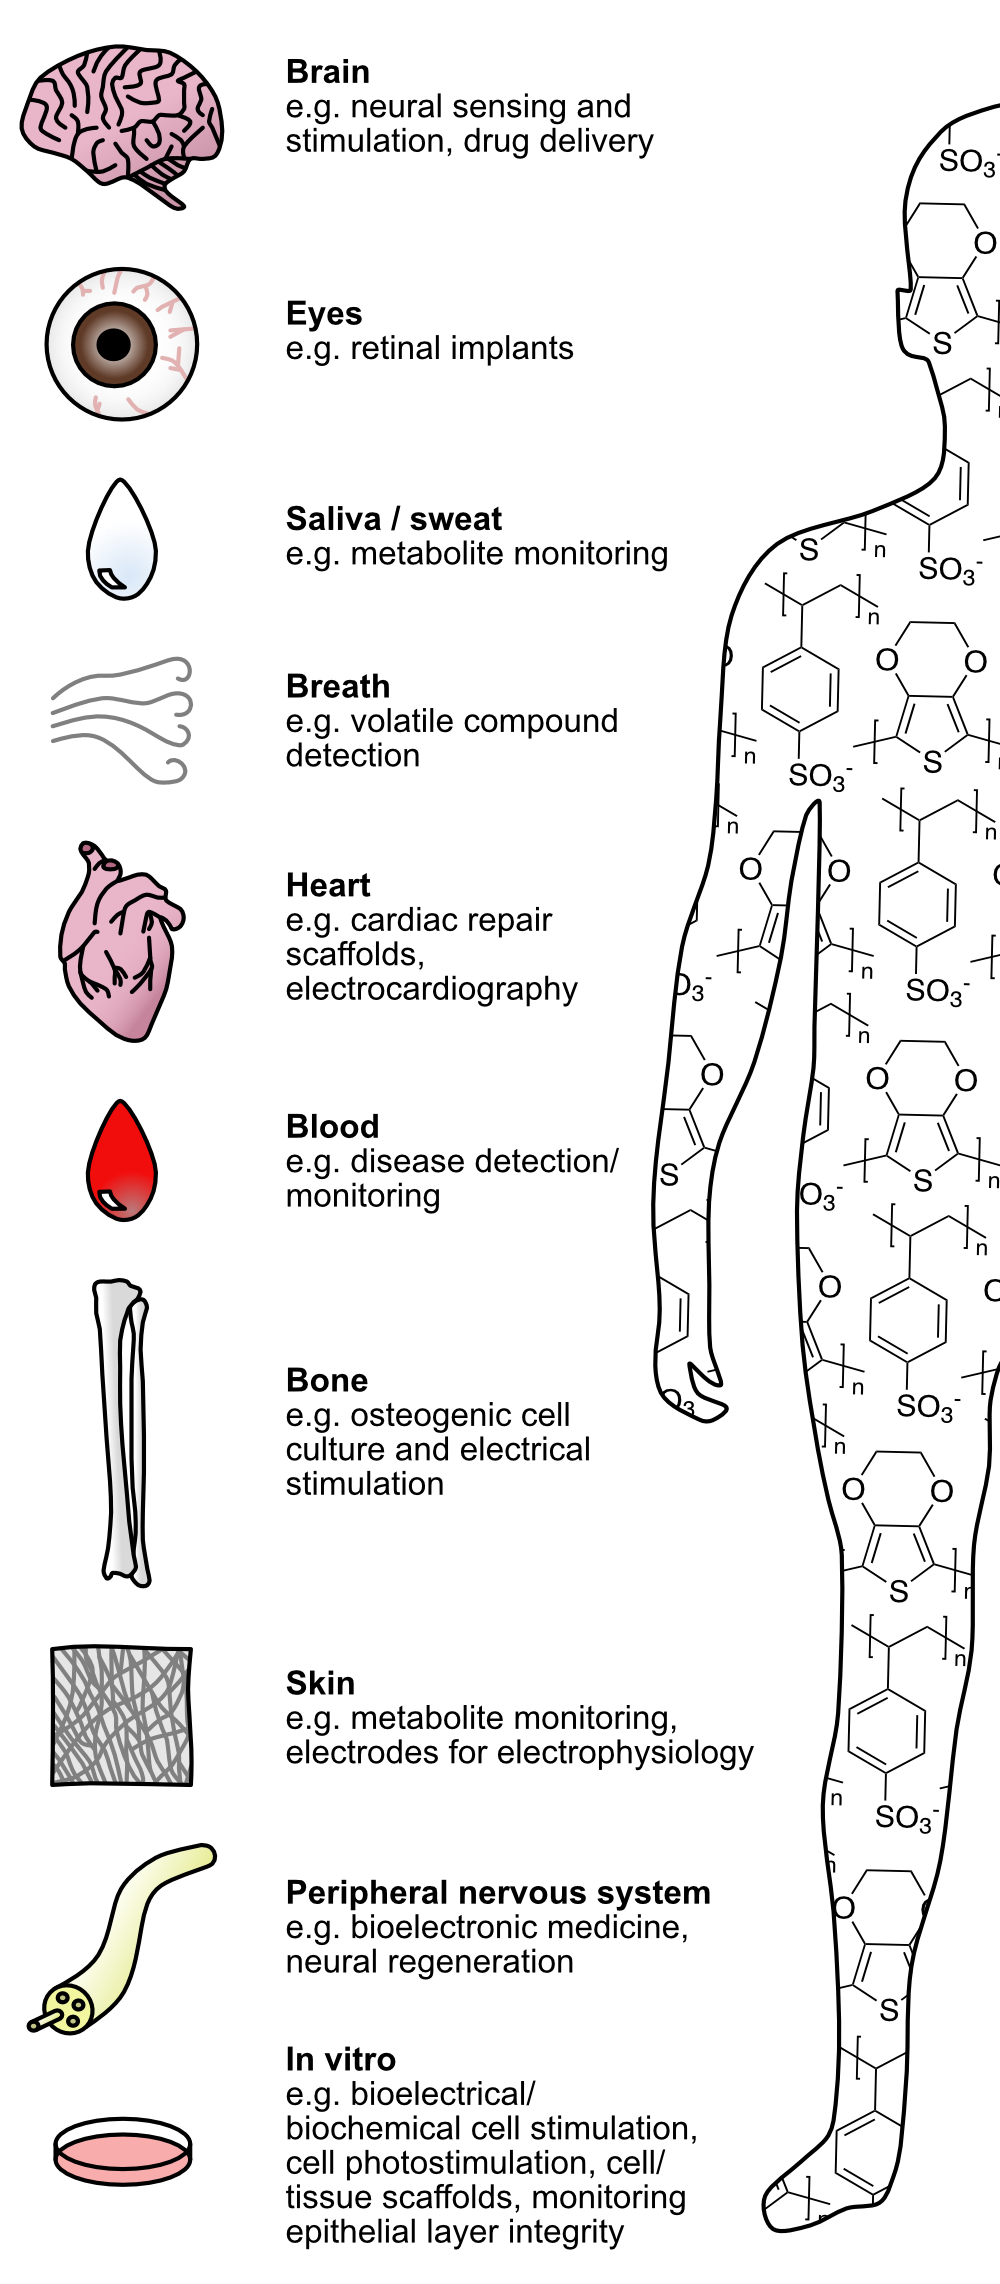 Illustration of organs being investigated with conjugated polymers